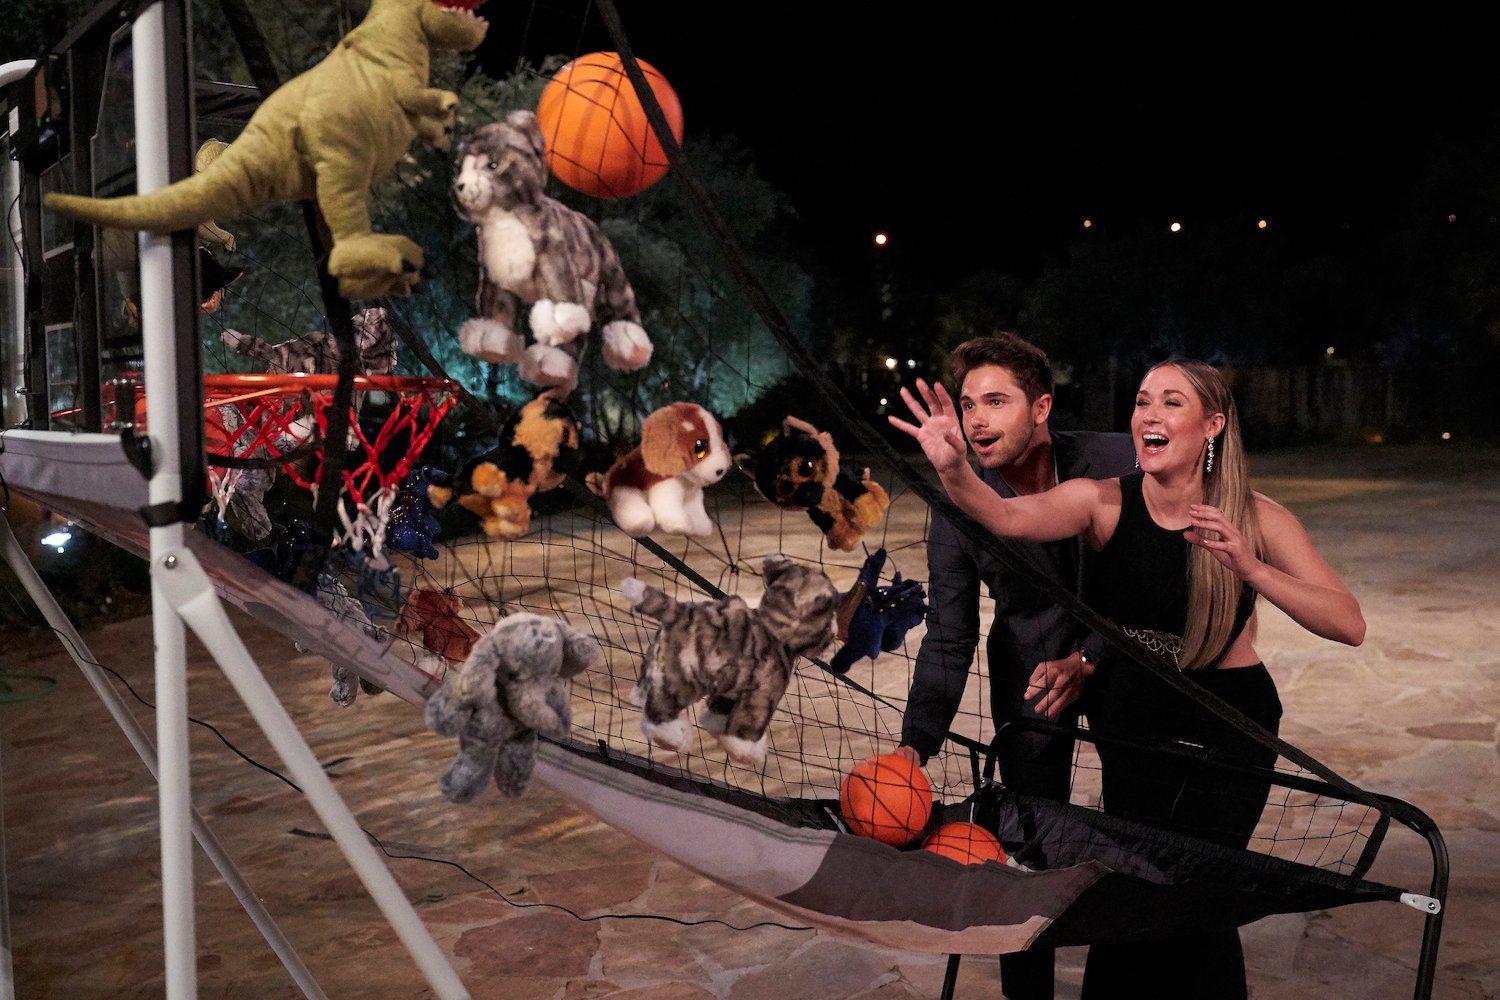 Tyler Norris and Rachel Recchia playing a carnival basketball game in 'The Bachelorette' Season 19. Tyler Norris is eliminated during hometowns.